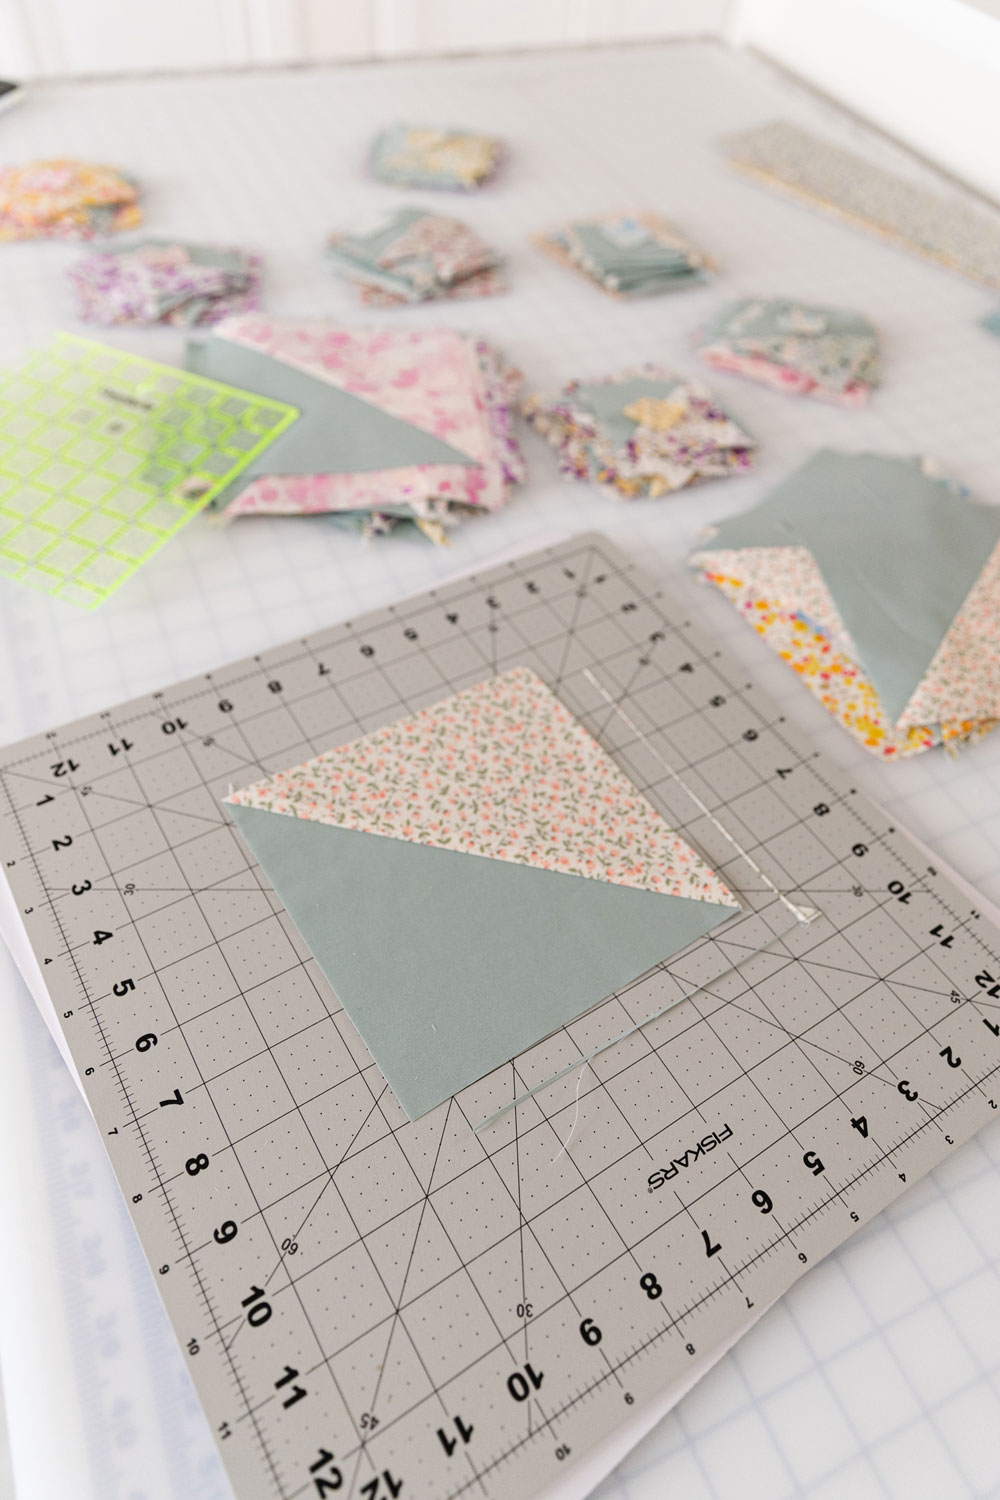 The Holiday Party quilt along includes added tutorials, instruction and quilting tips to sew this fat quarter modern quilt. suzyquilts.com #quilt #sew